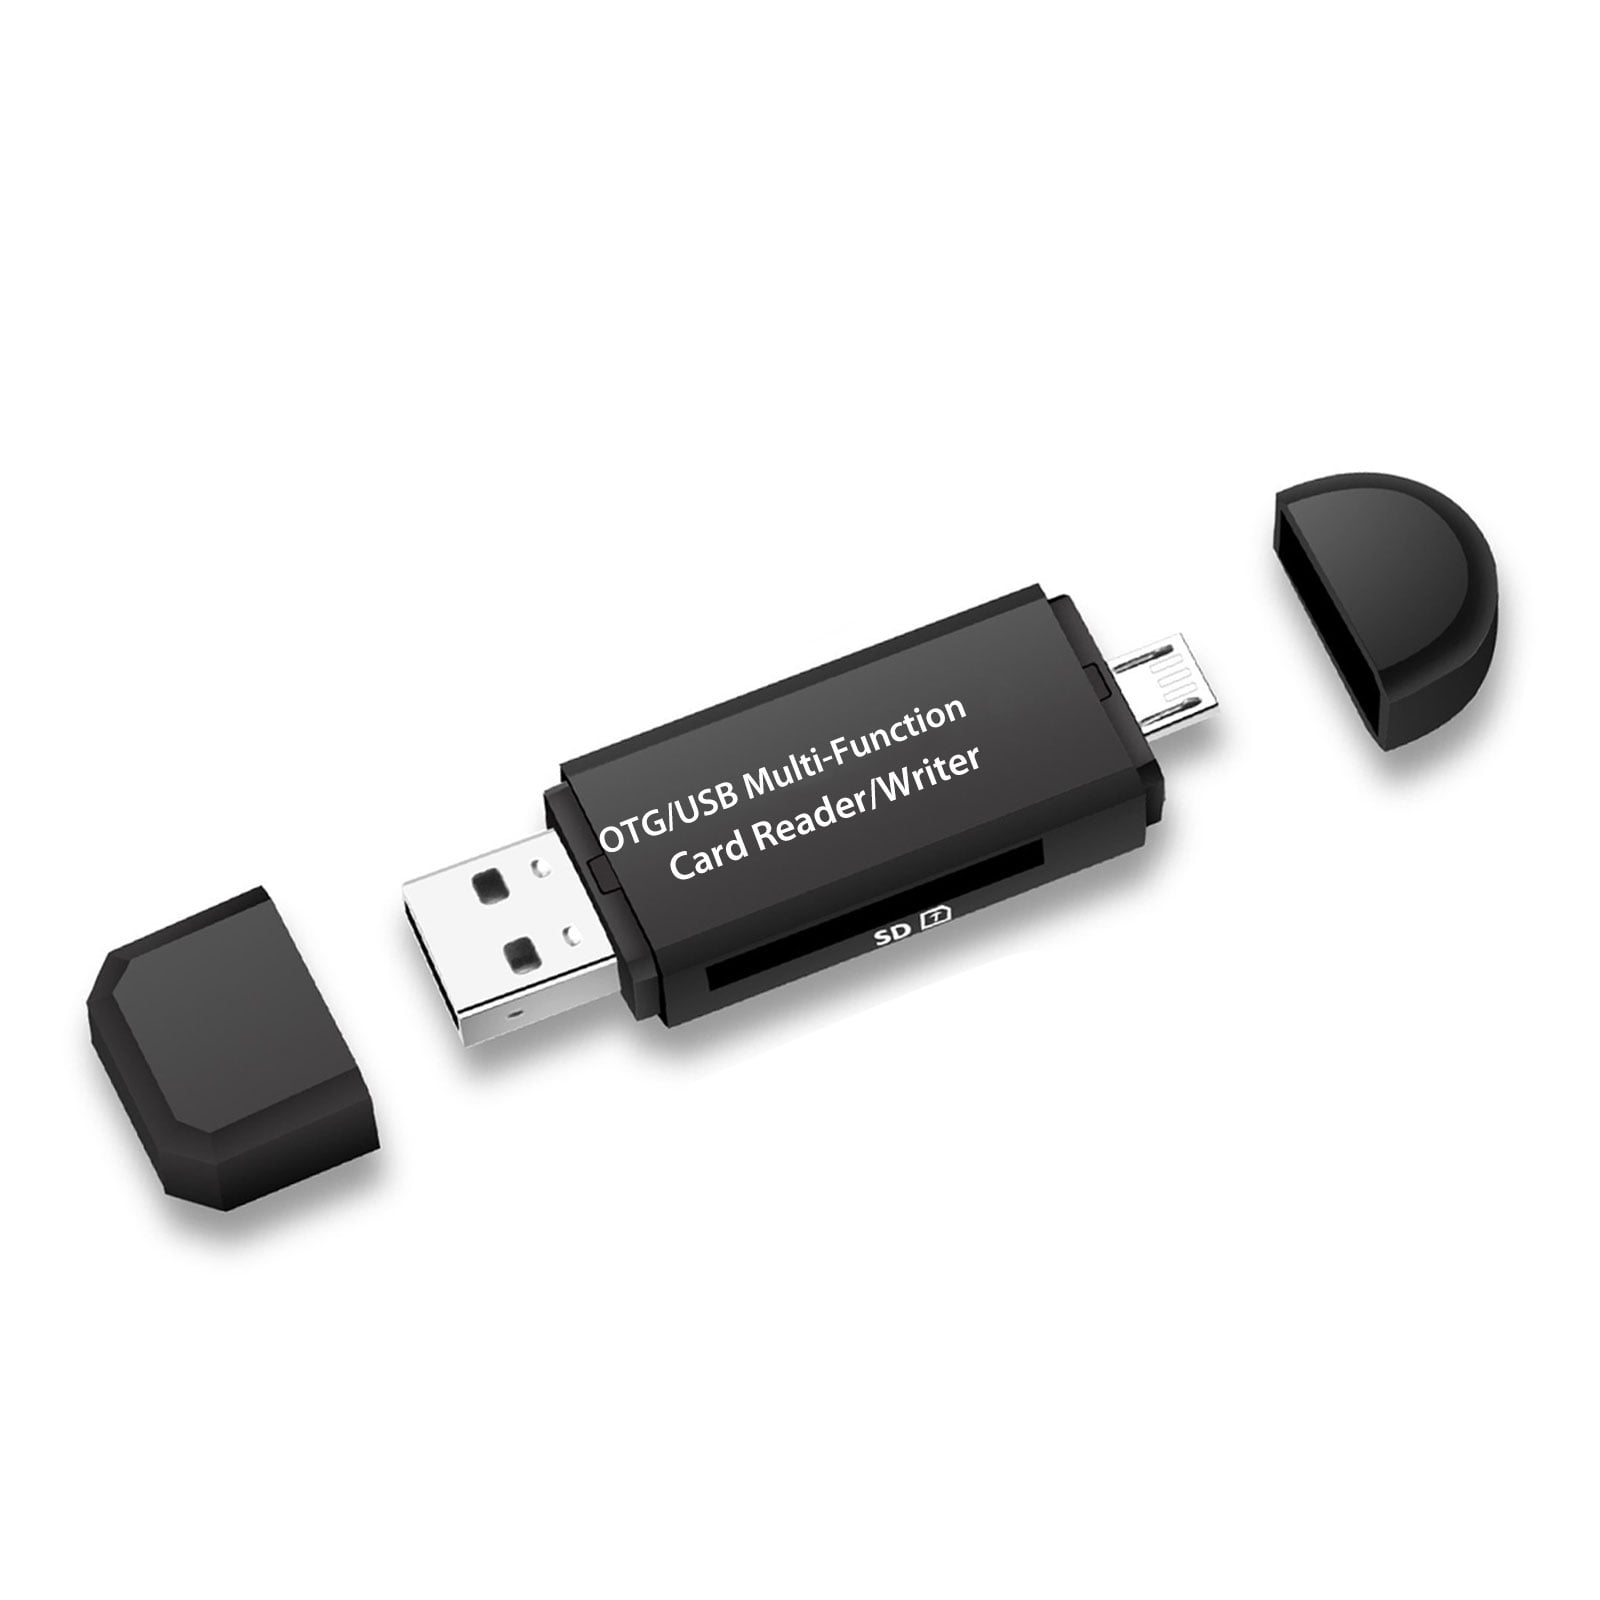 Black Micro USB OTG to USB 2.0 Adapter SD Card Reader For Android Phone Tablet